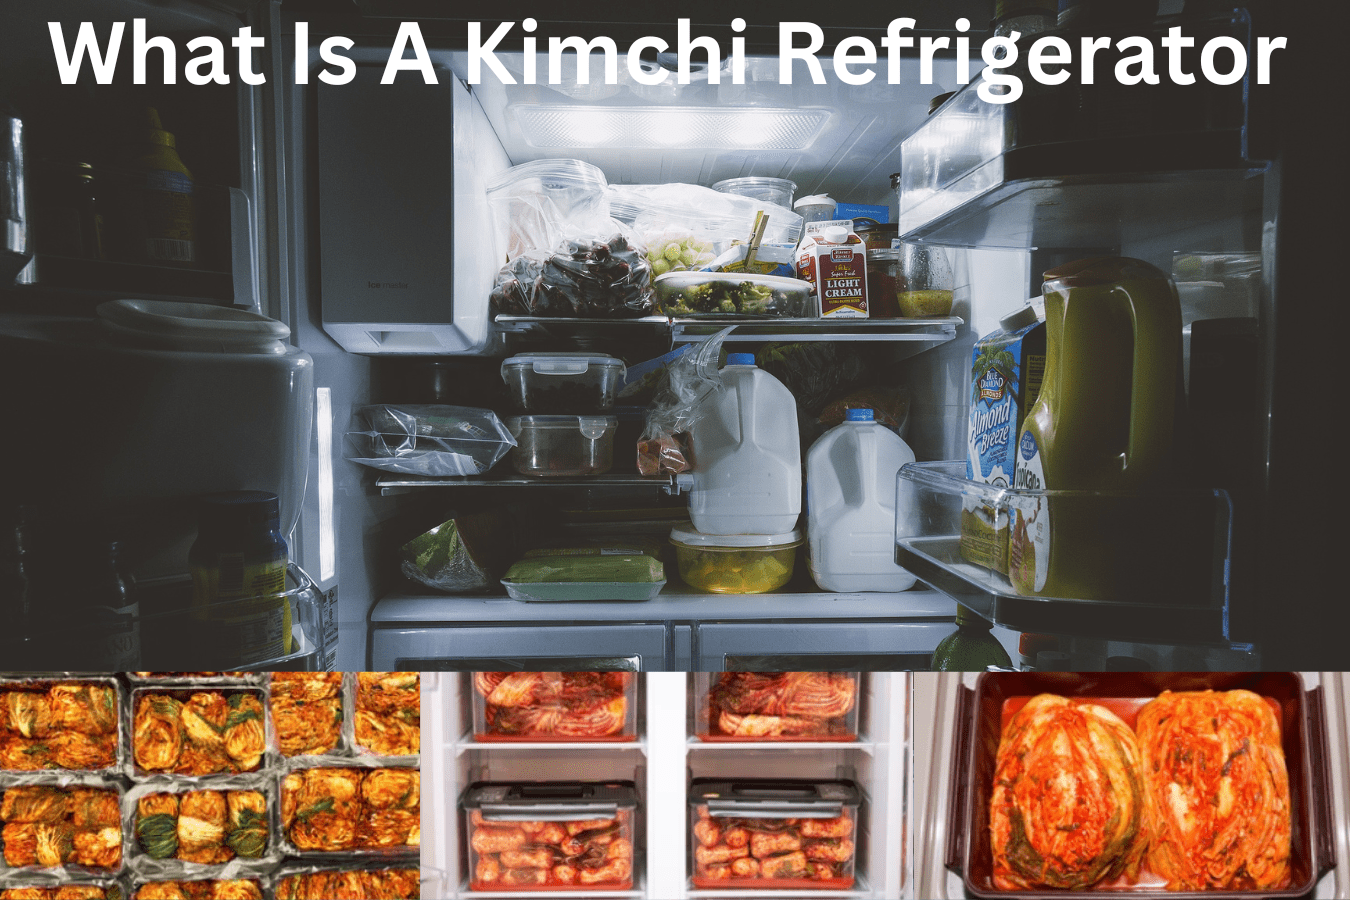 What Is A Kimchi Refrigerator